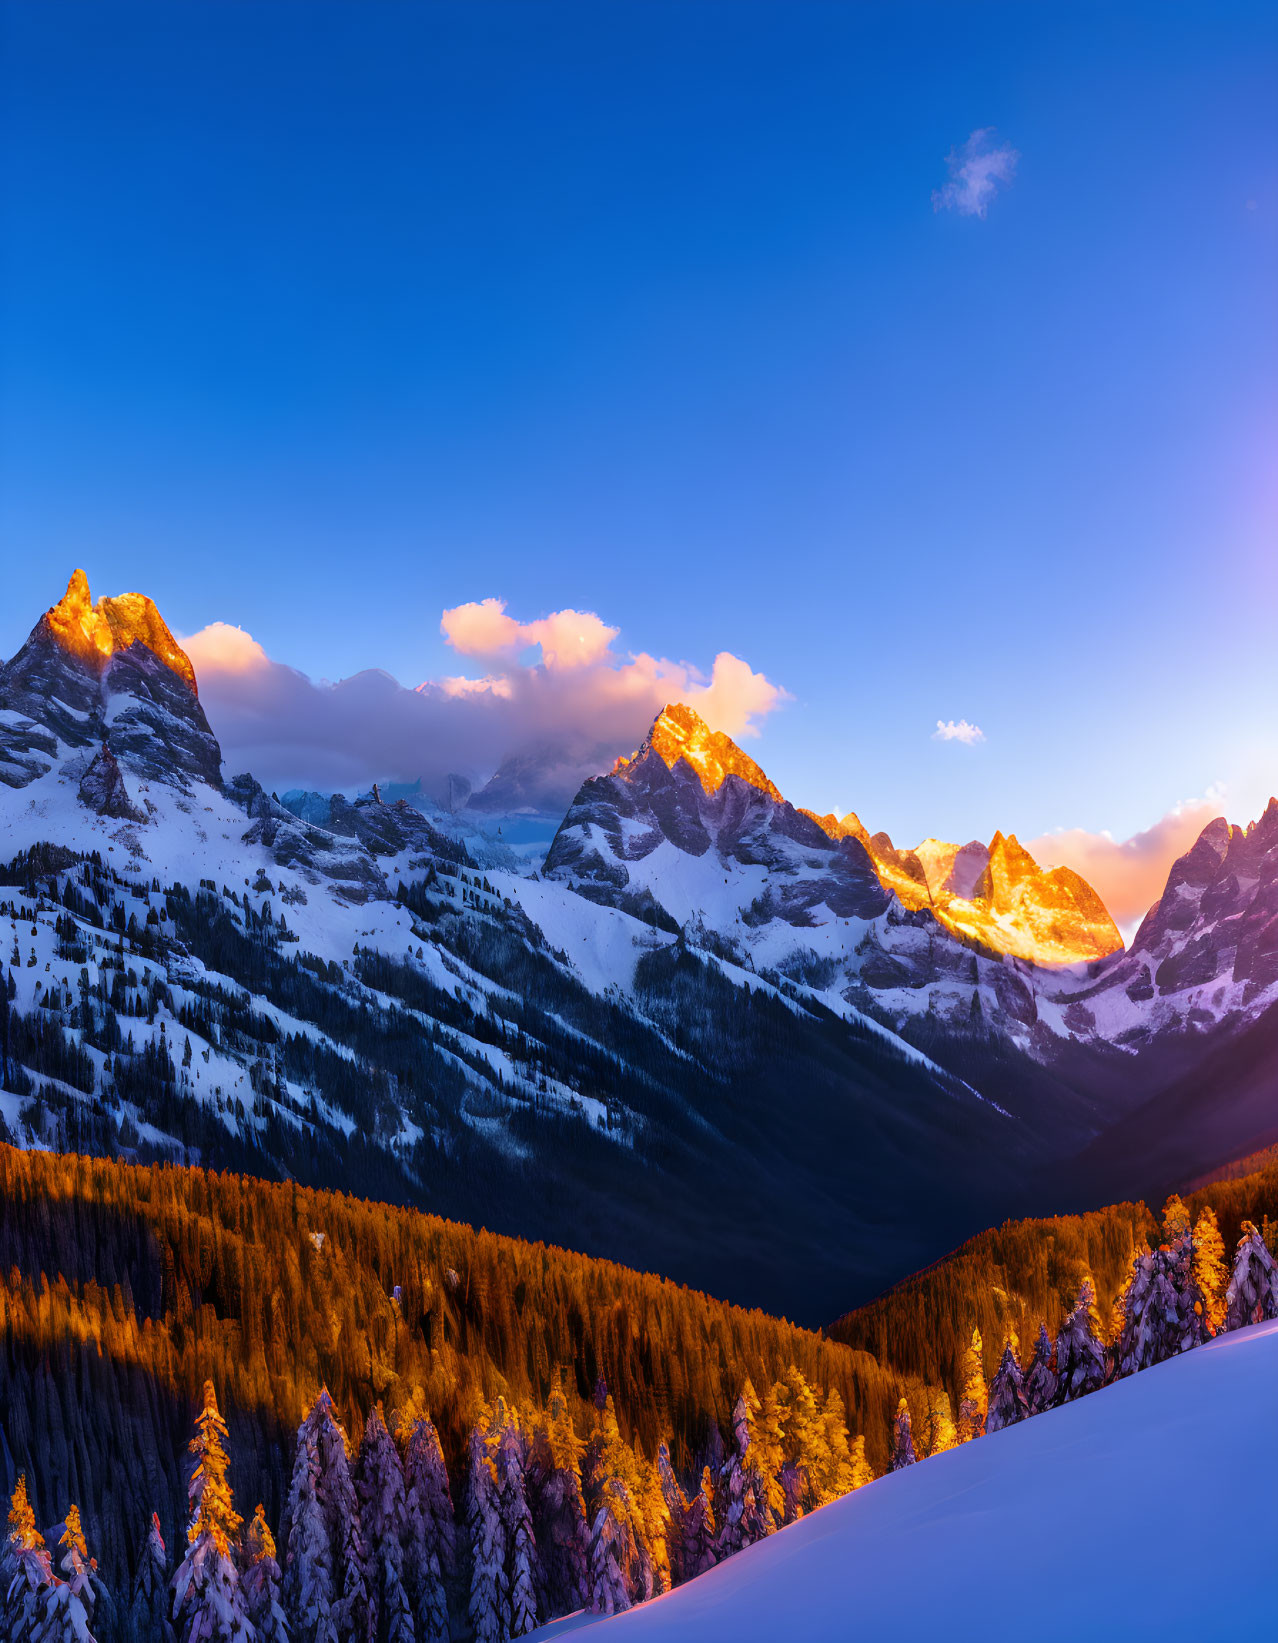 Snow-covered Peaks and Forested Slopes at Sunrise in Alpine Setting